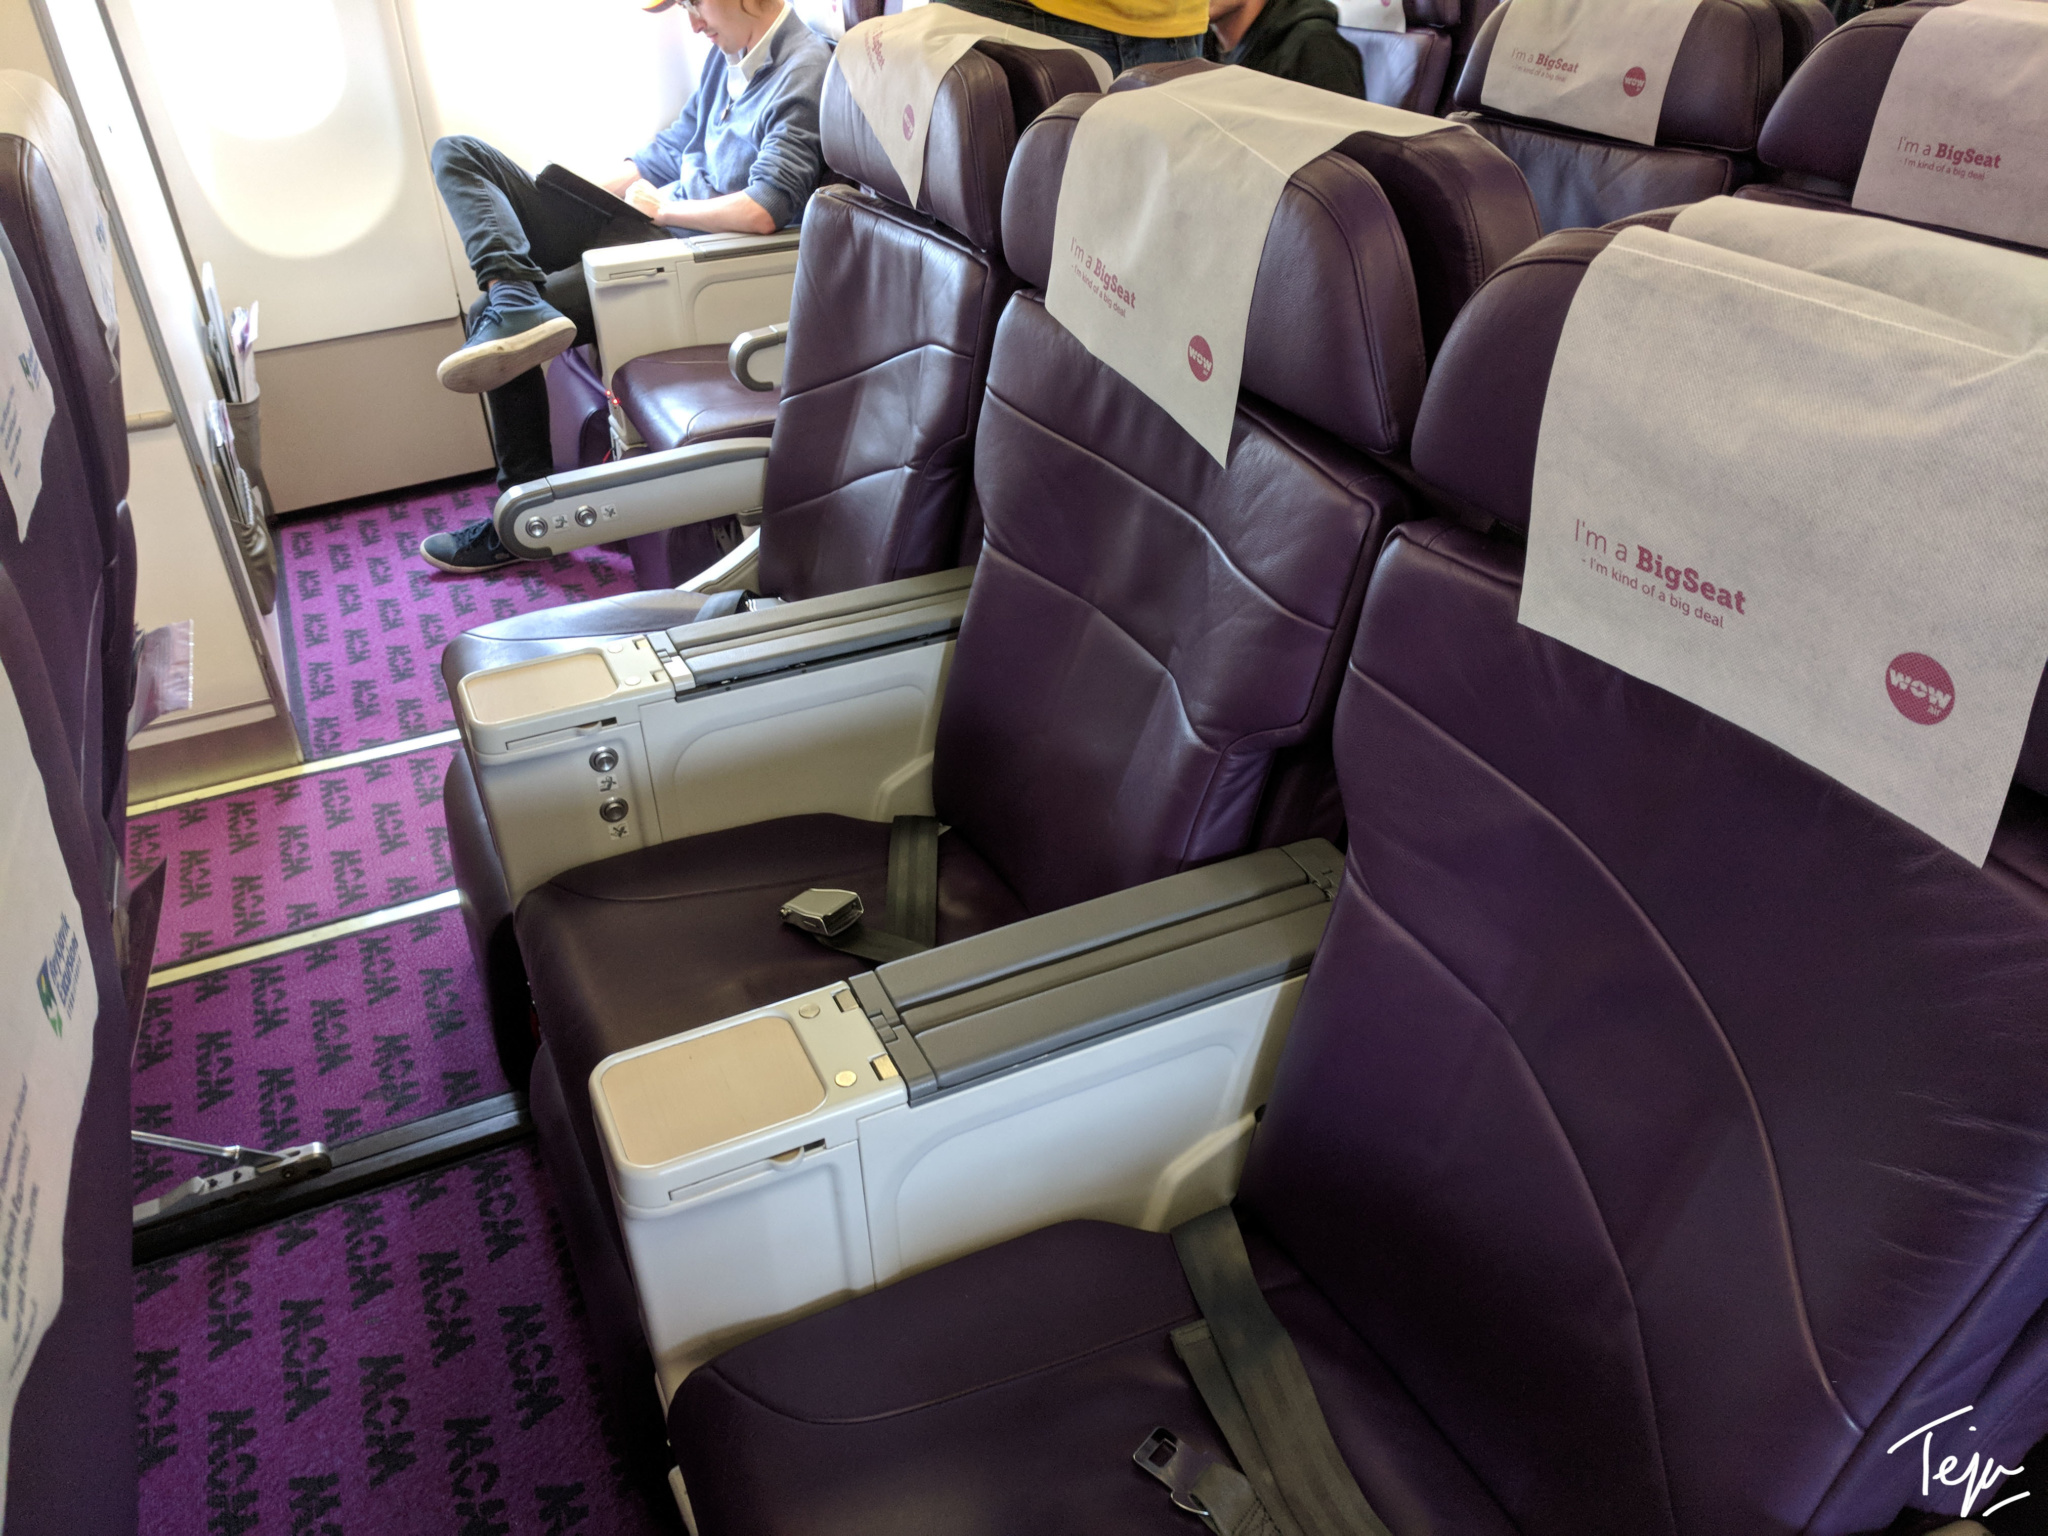 Wow Air Seating Chart